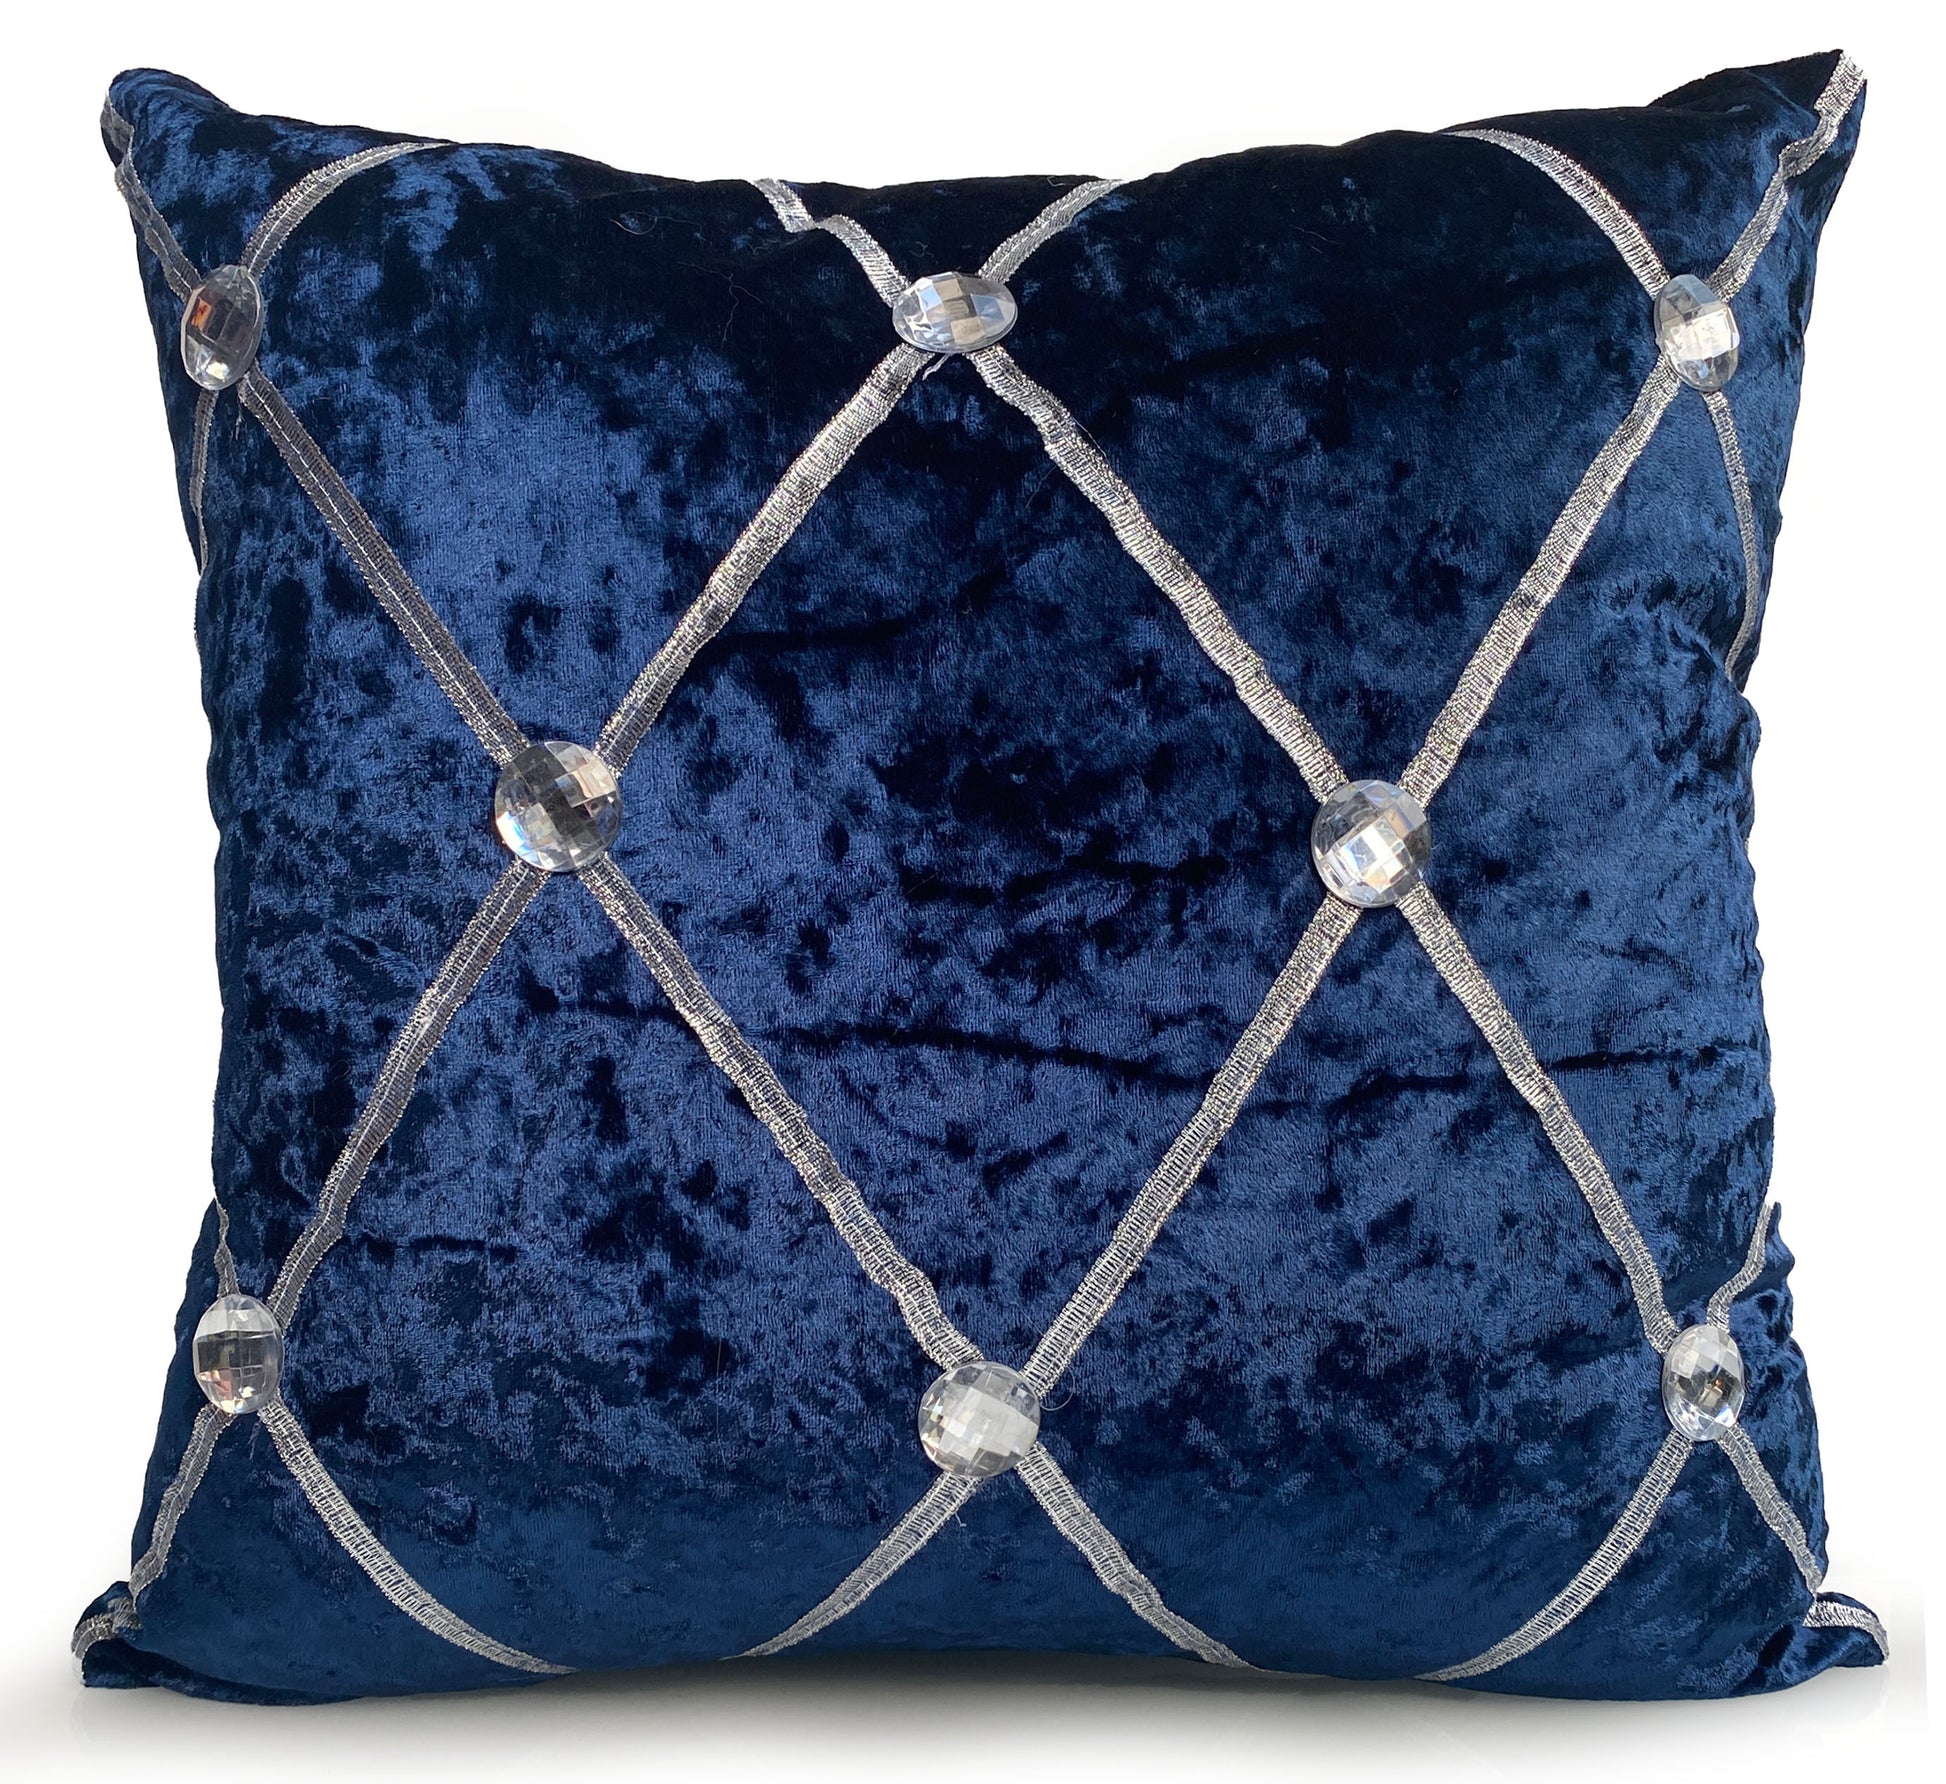 Large Crush Velvet Diamante Chesterfield Cushions or Covers Navy Blue